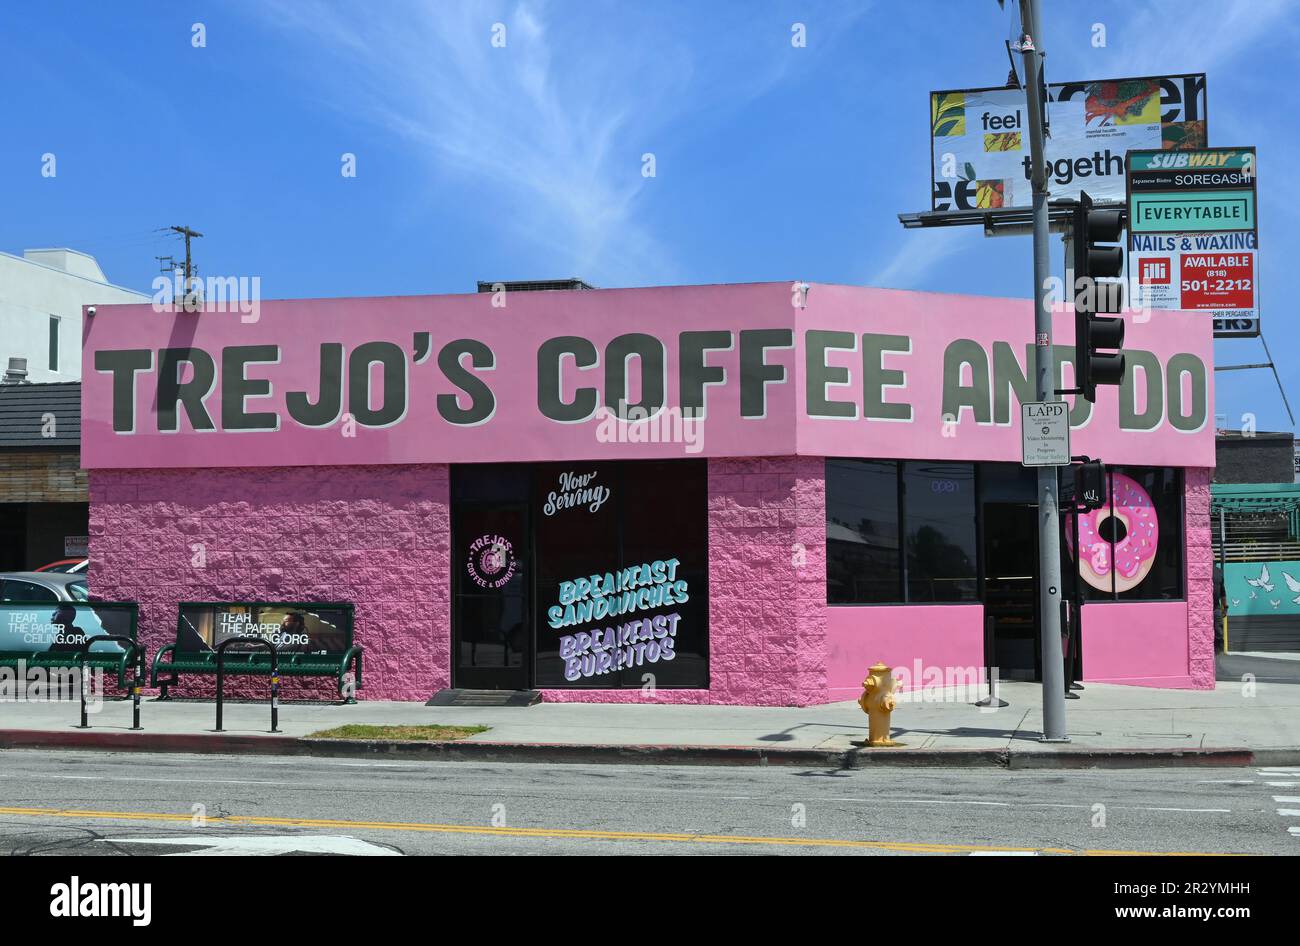 LOS ANGELES, CALIFORNIA - 12 MAY 2023: Trejos Coffee and Donuts, owned by actor Danny Trejo, on the corner of Santa Monica Boulevard and Highland Aven Stock Photo